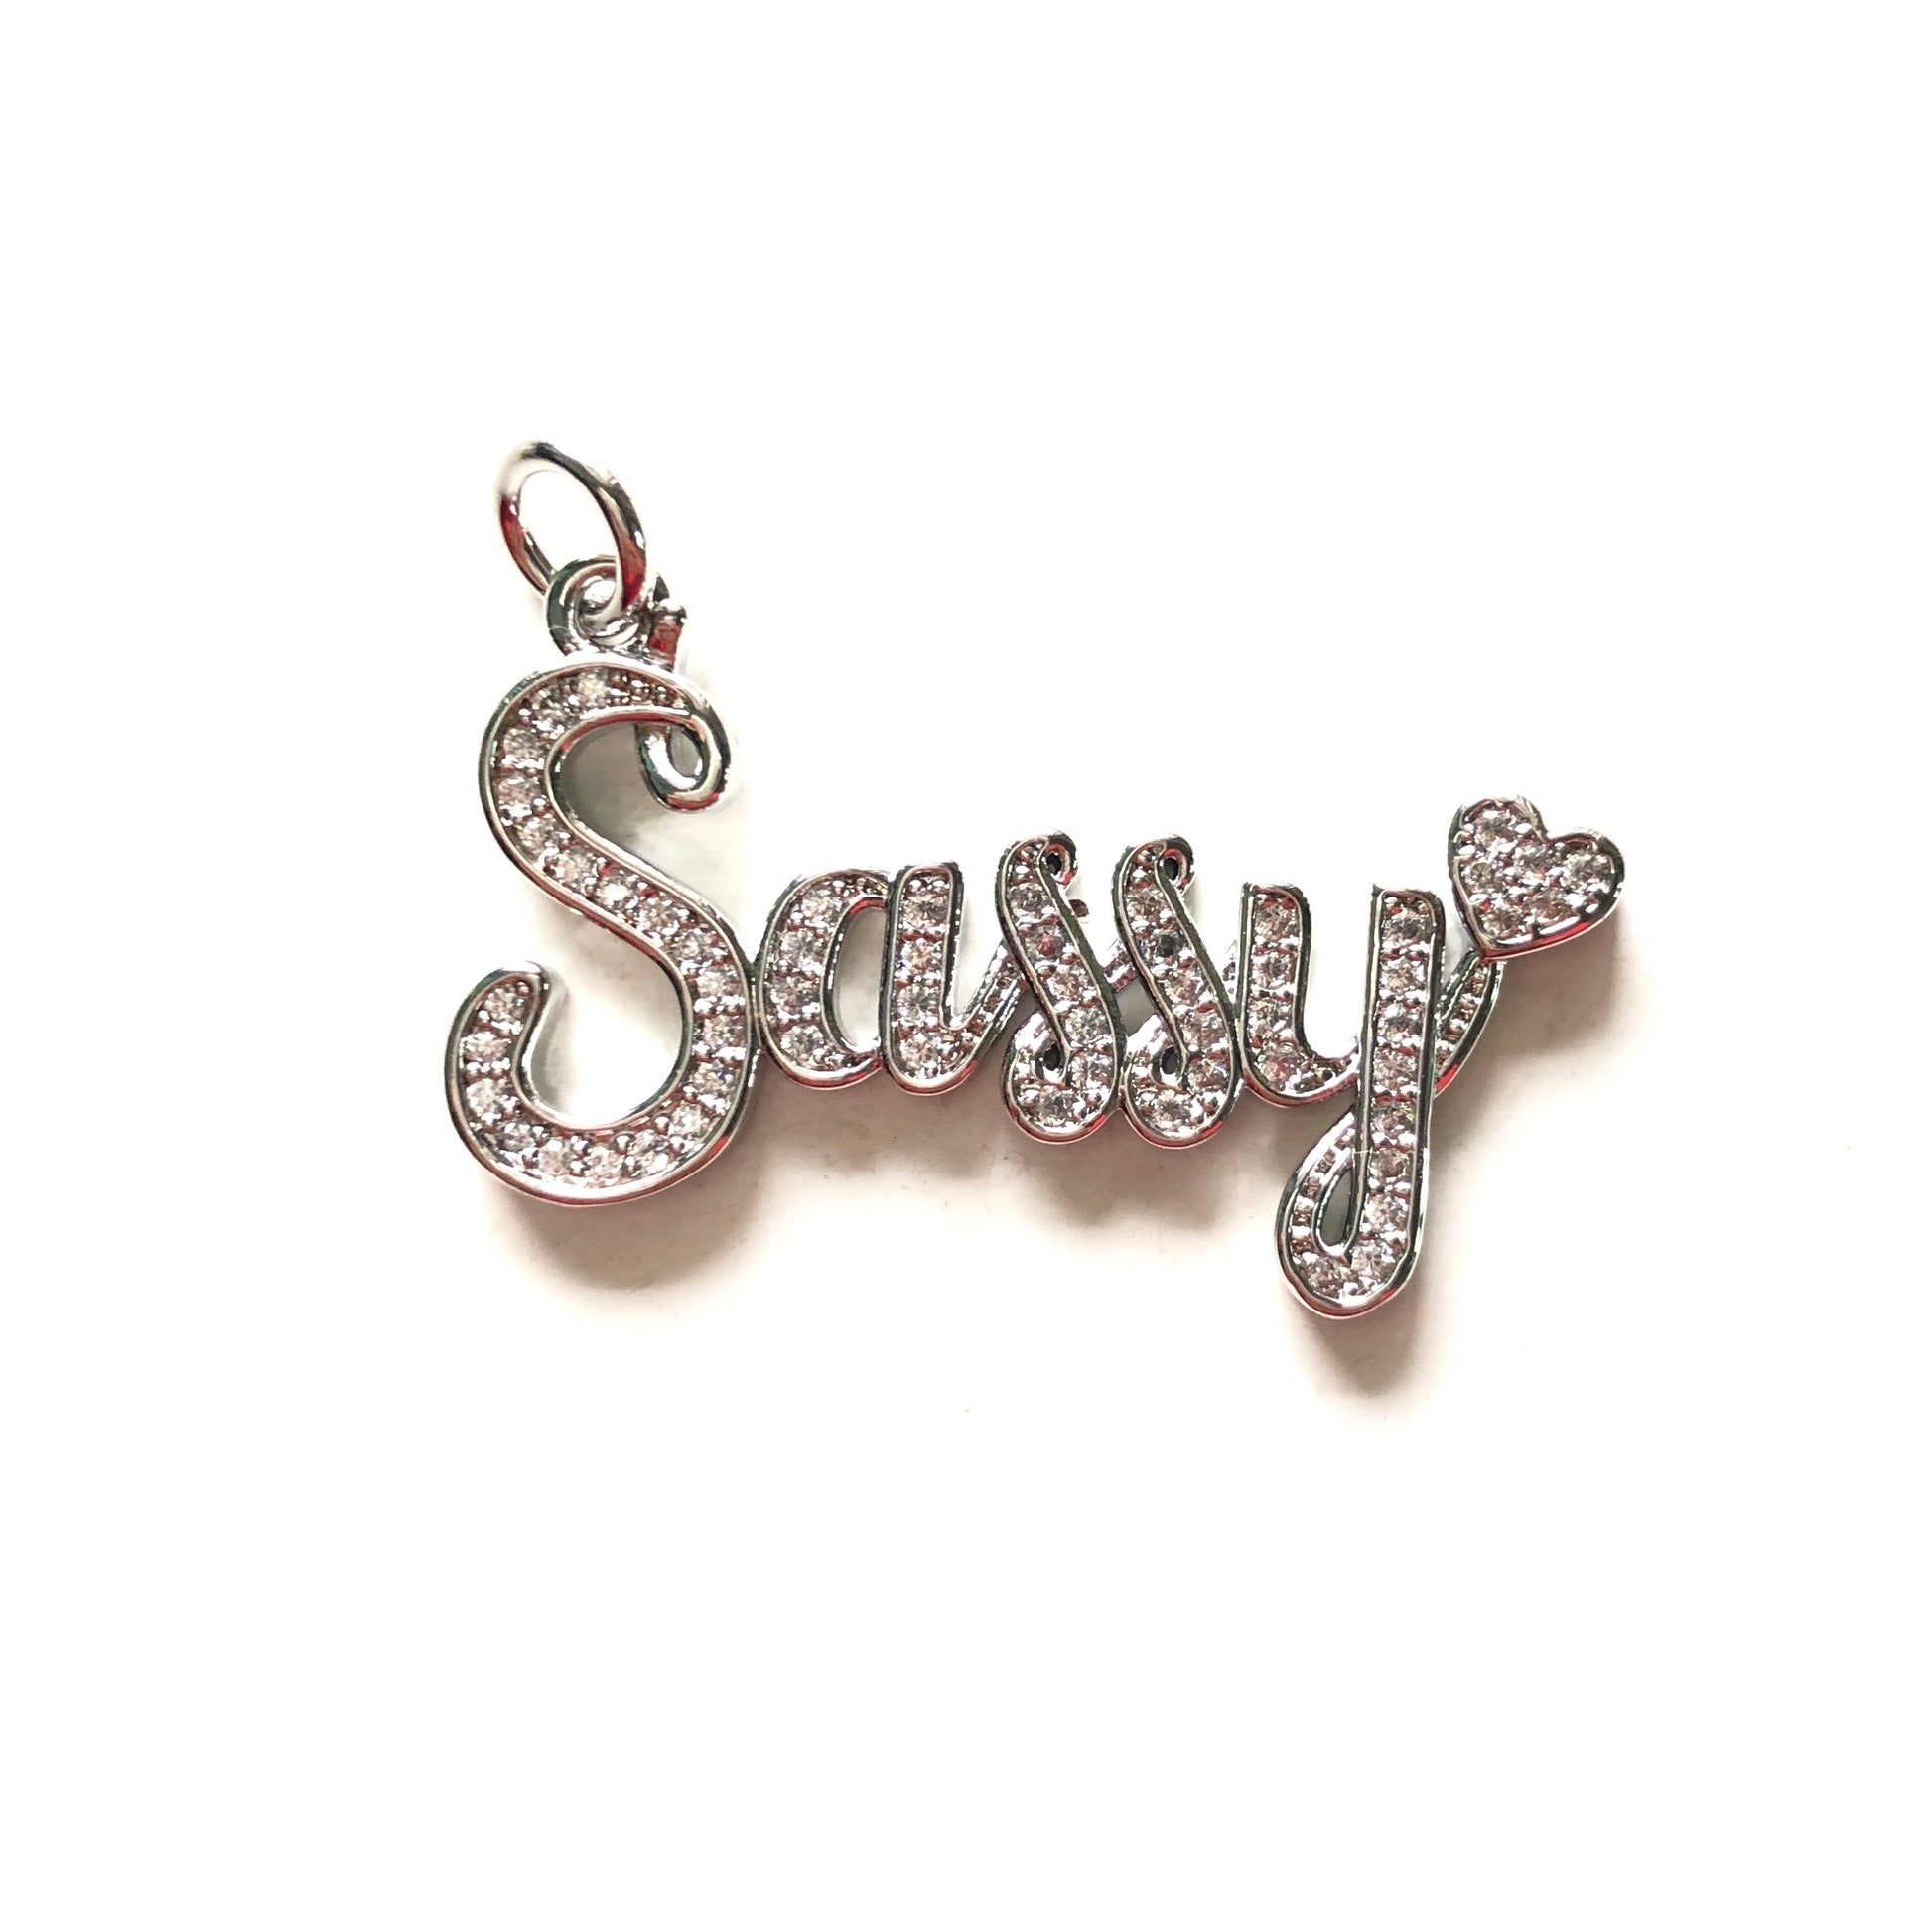 10pcs/lot 34*19mm CZ Paved Sassy Word Charms Silver CZ Paved Charms On Sale Words & Quotes Charms Beads Beyond